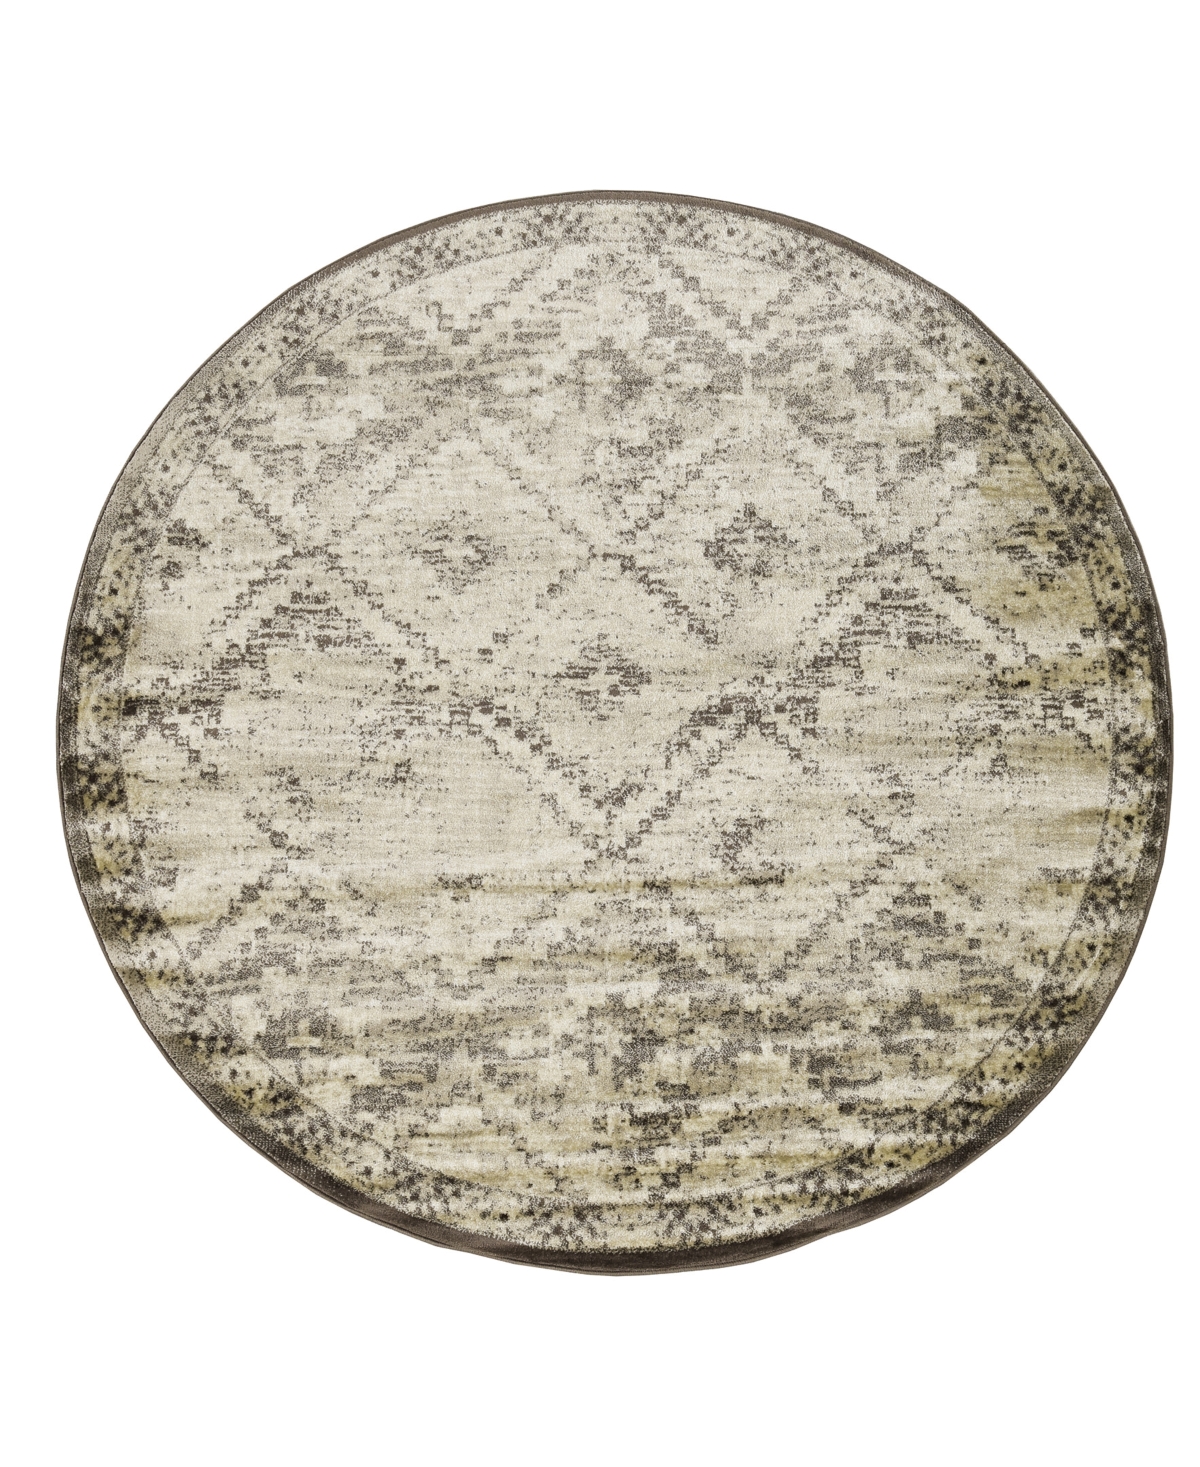 Kas Heritage 9366 7'7" X 7'7" Round Area Rug In Gray